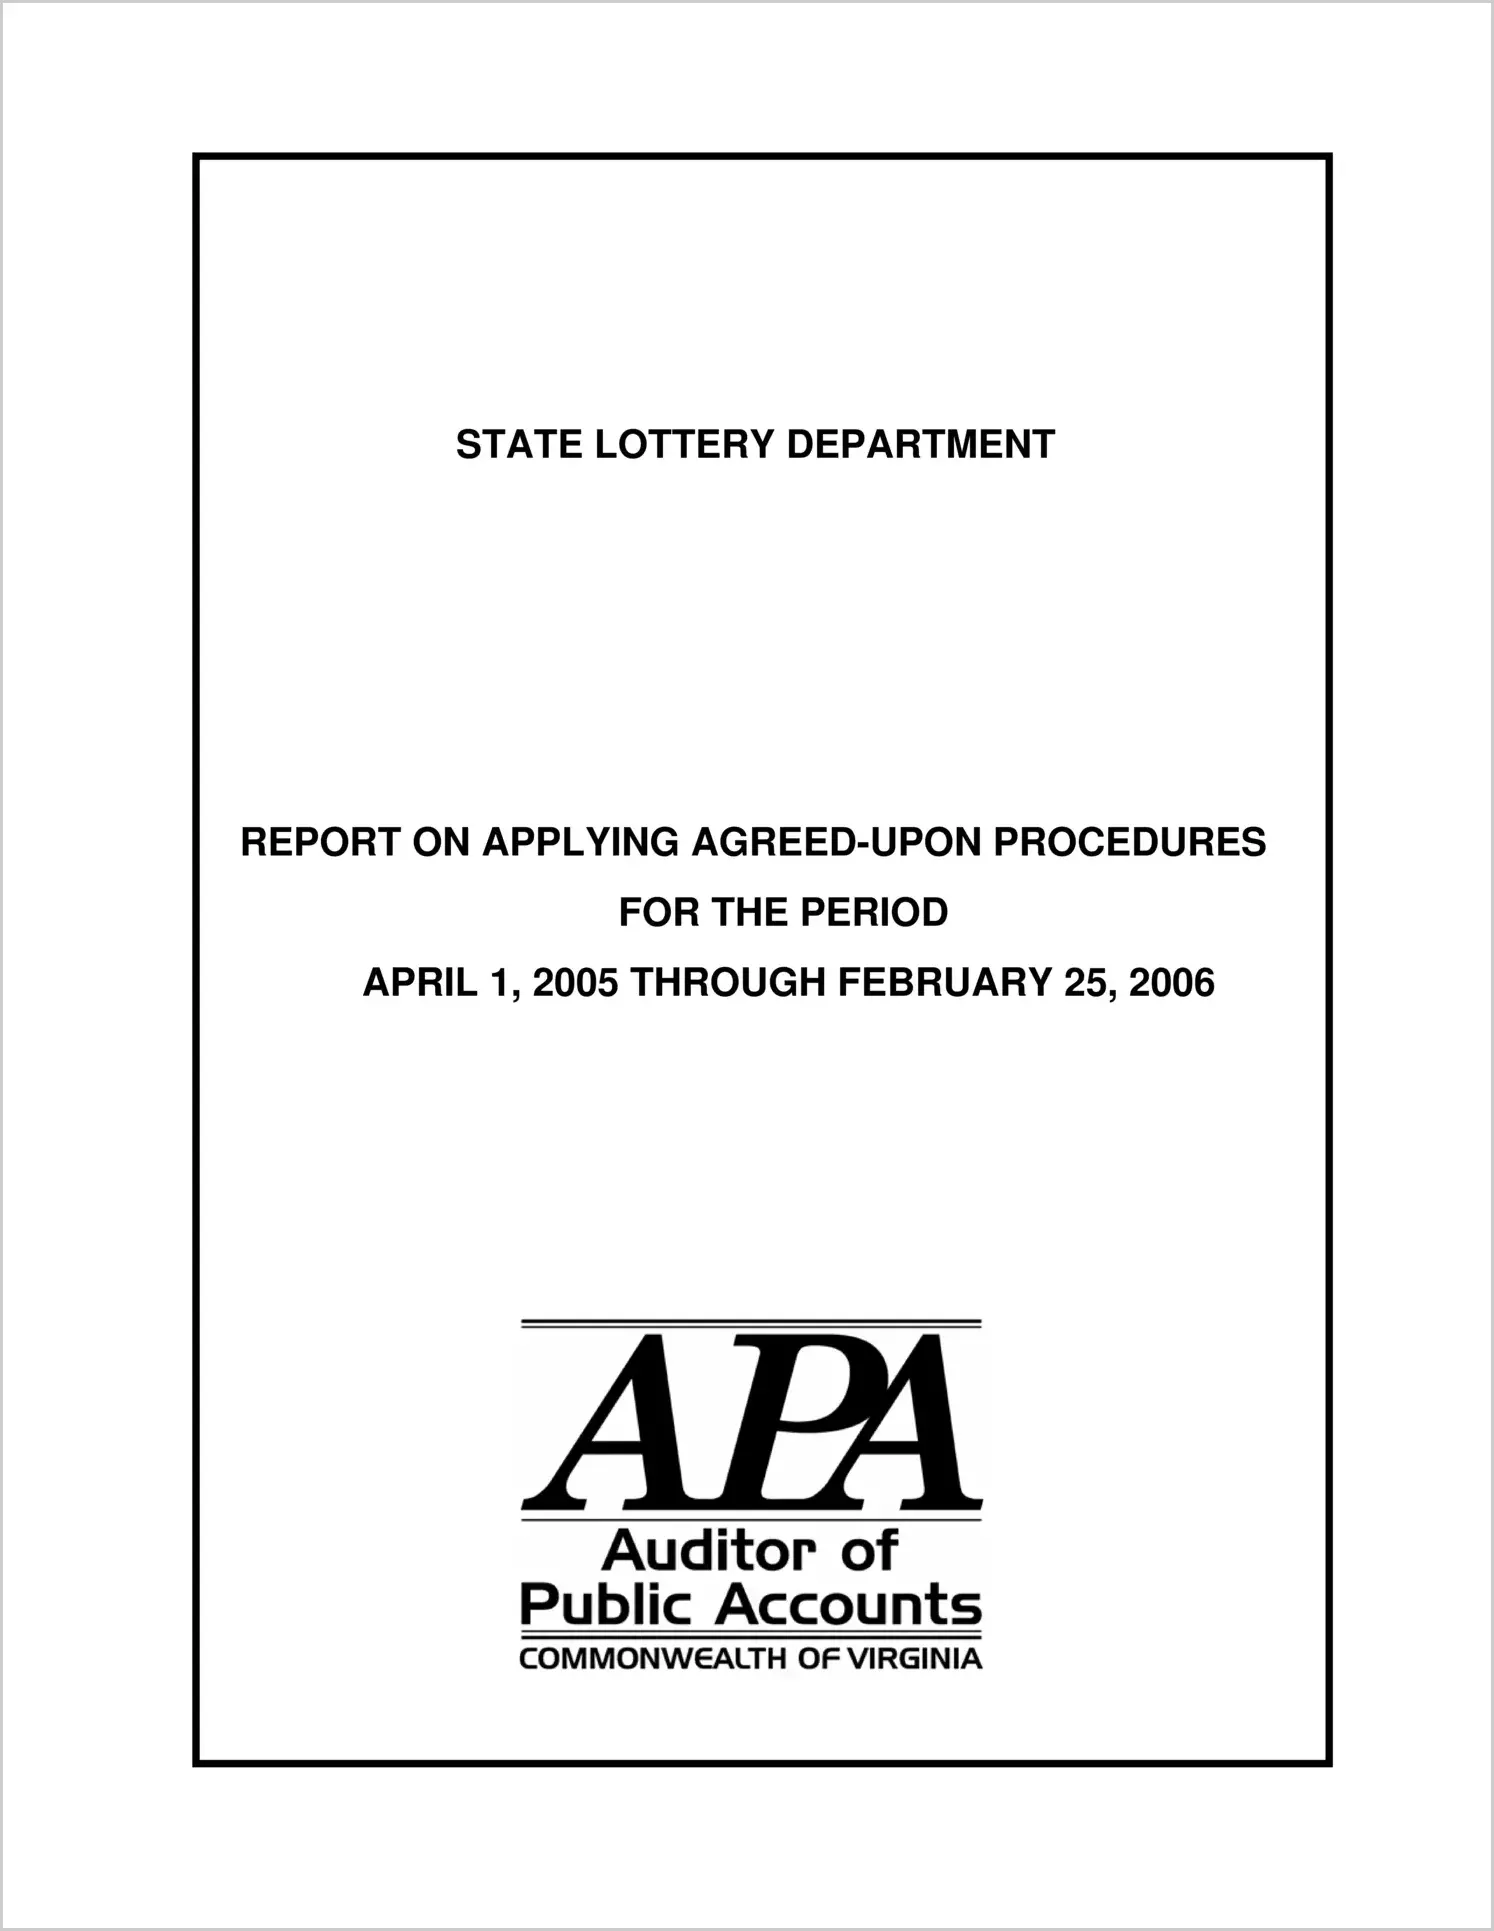 Special ReportState Lottery Department Report on Applying Agreed-Upon Procedures (Lotto South)(Report Period: 4/1/05 - 2/25/06)